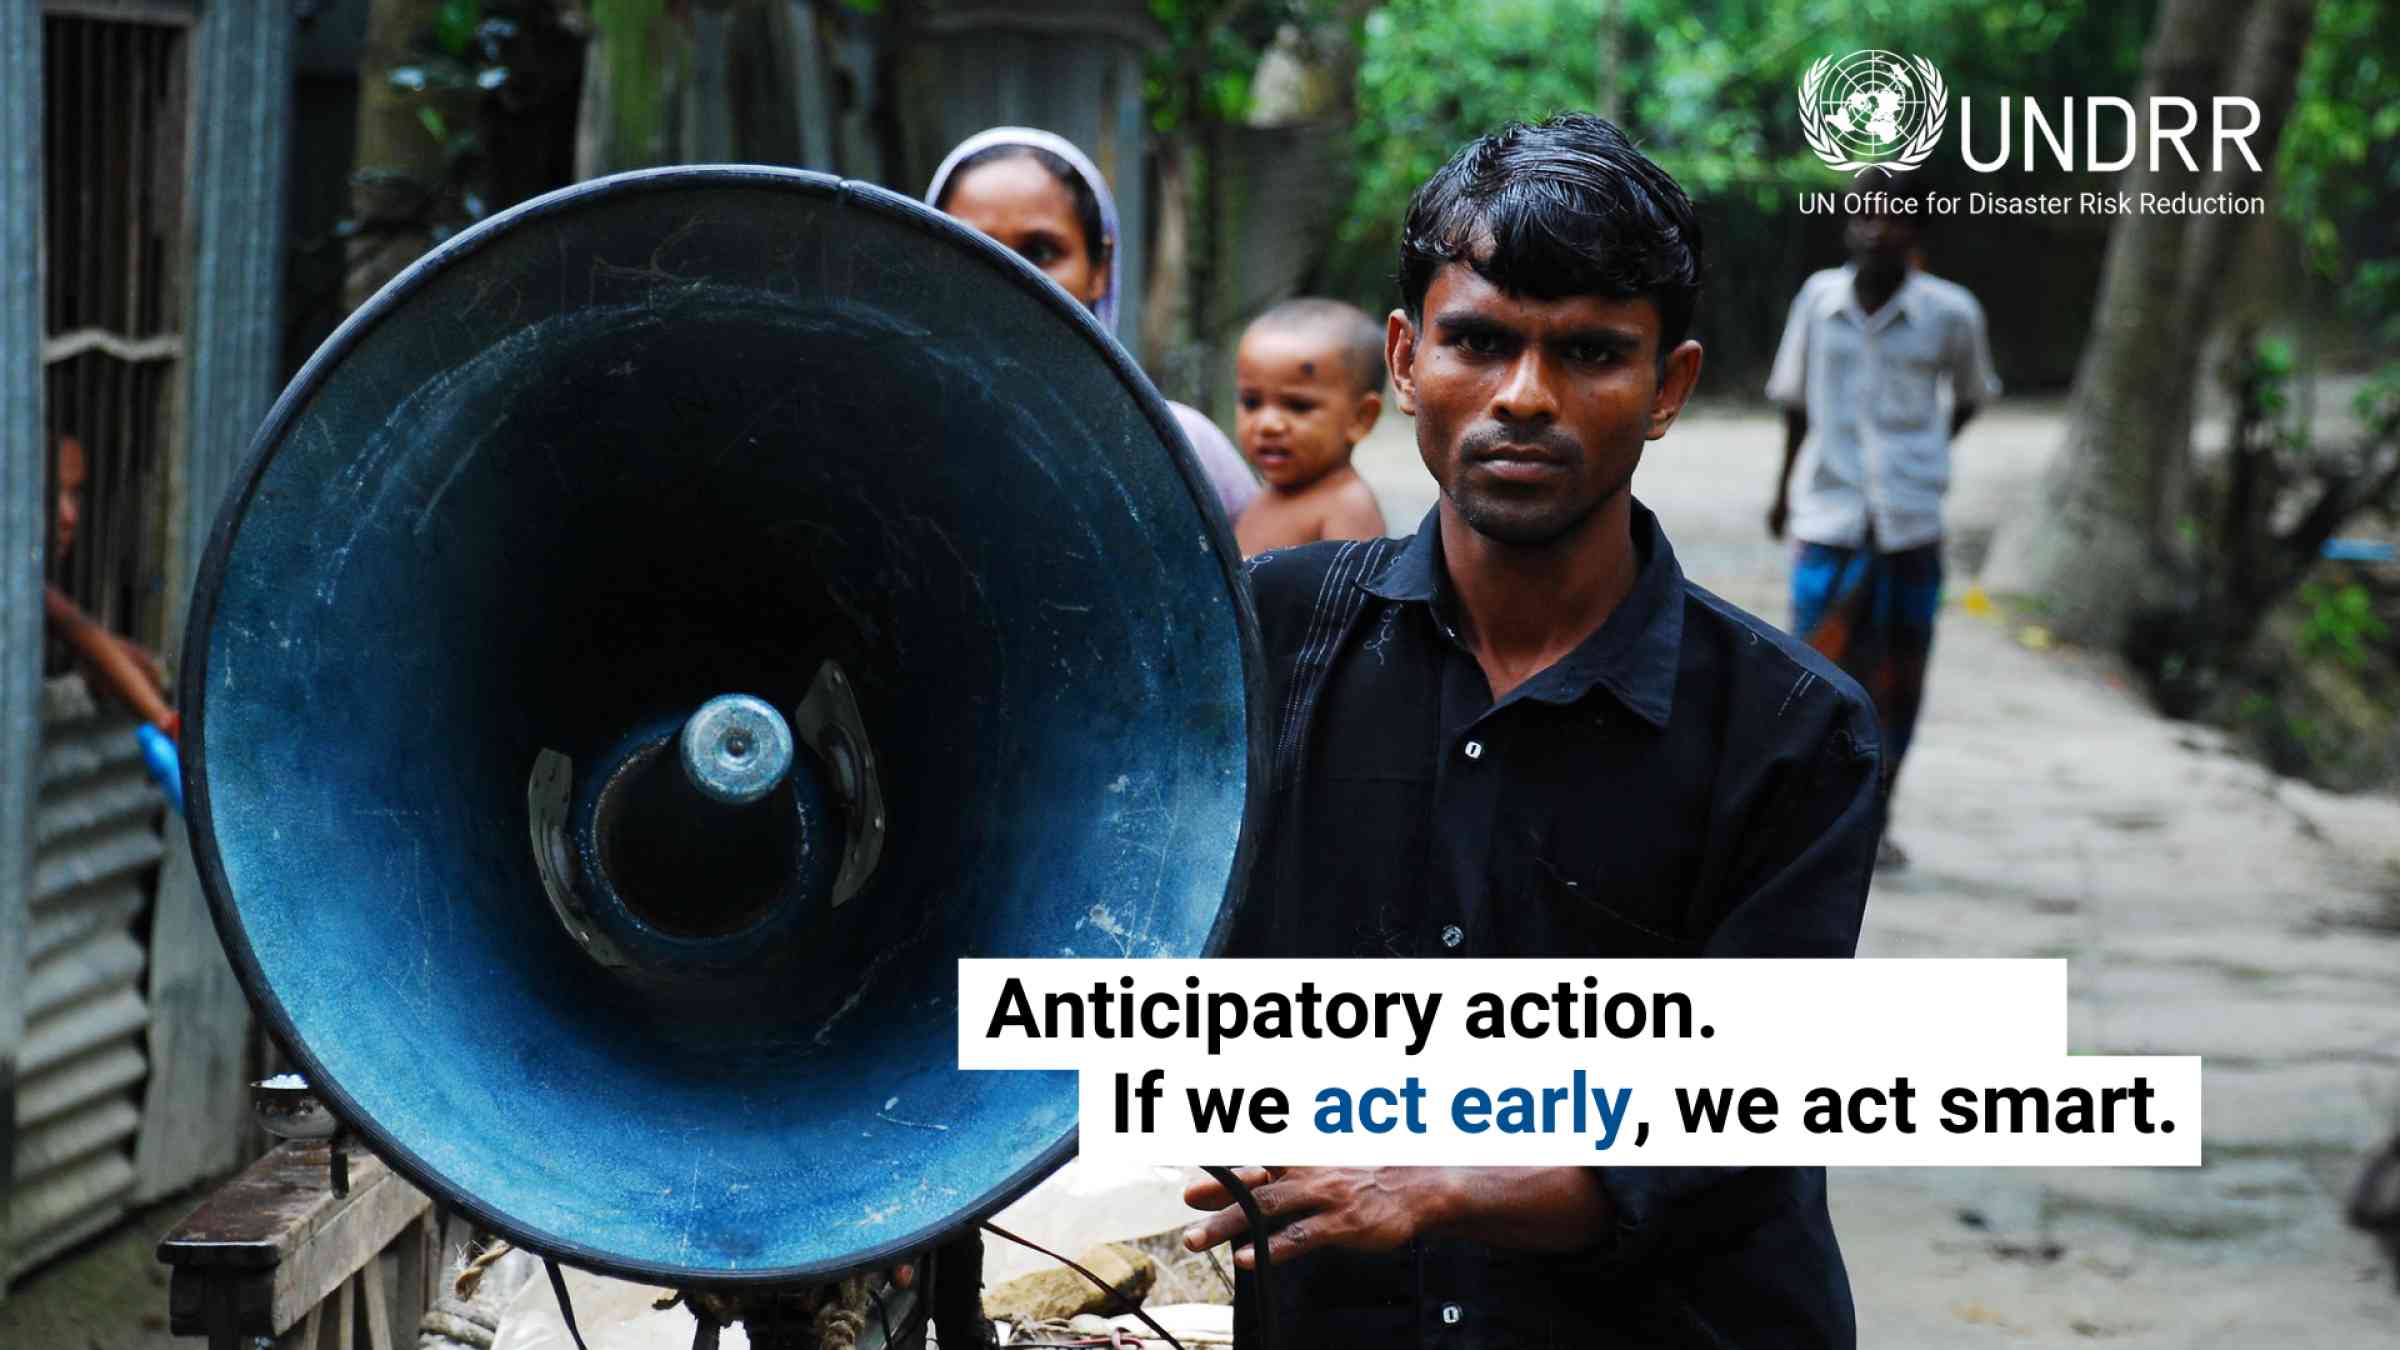 Anticipatory action- if we act early we act smart